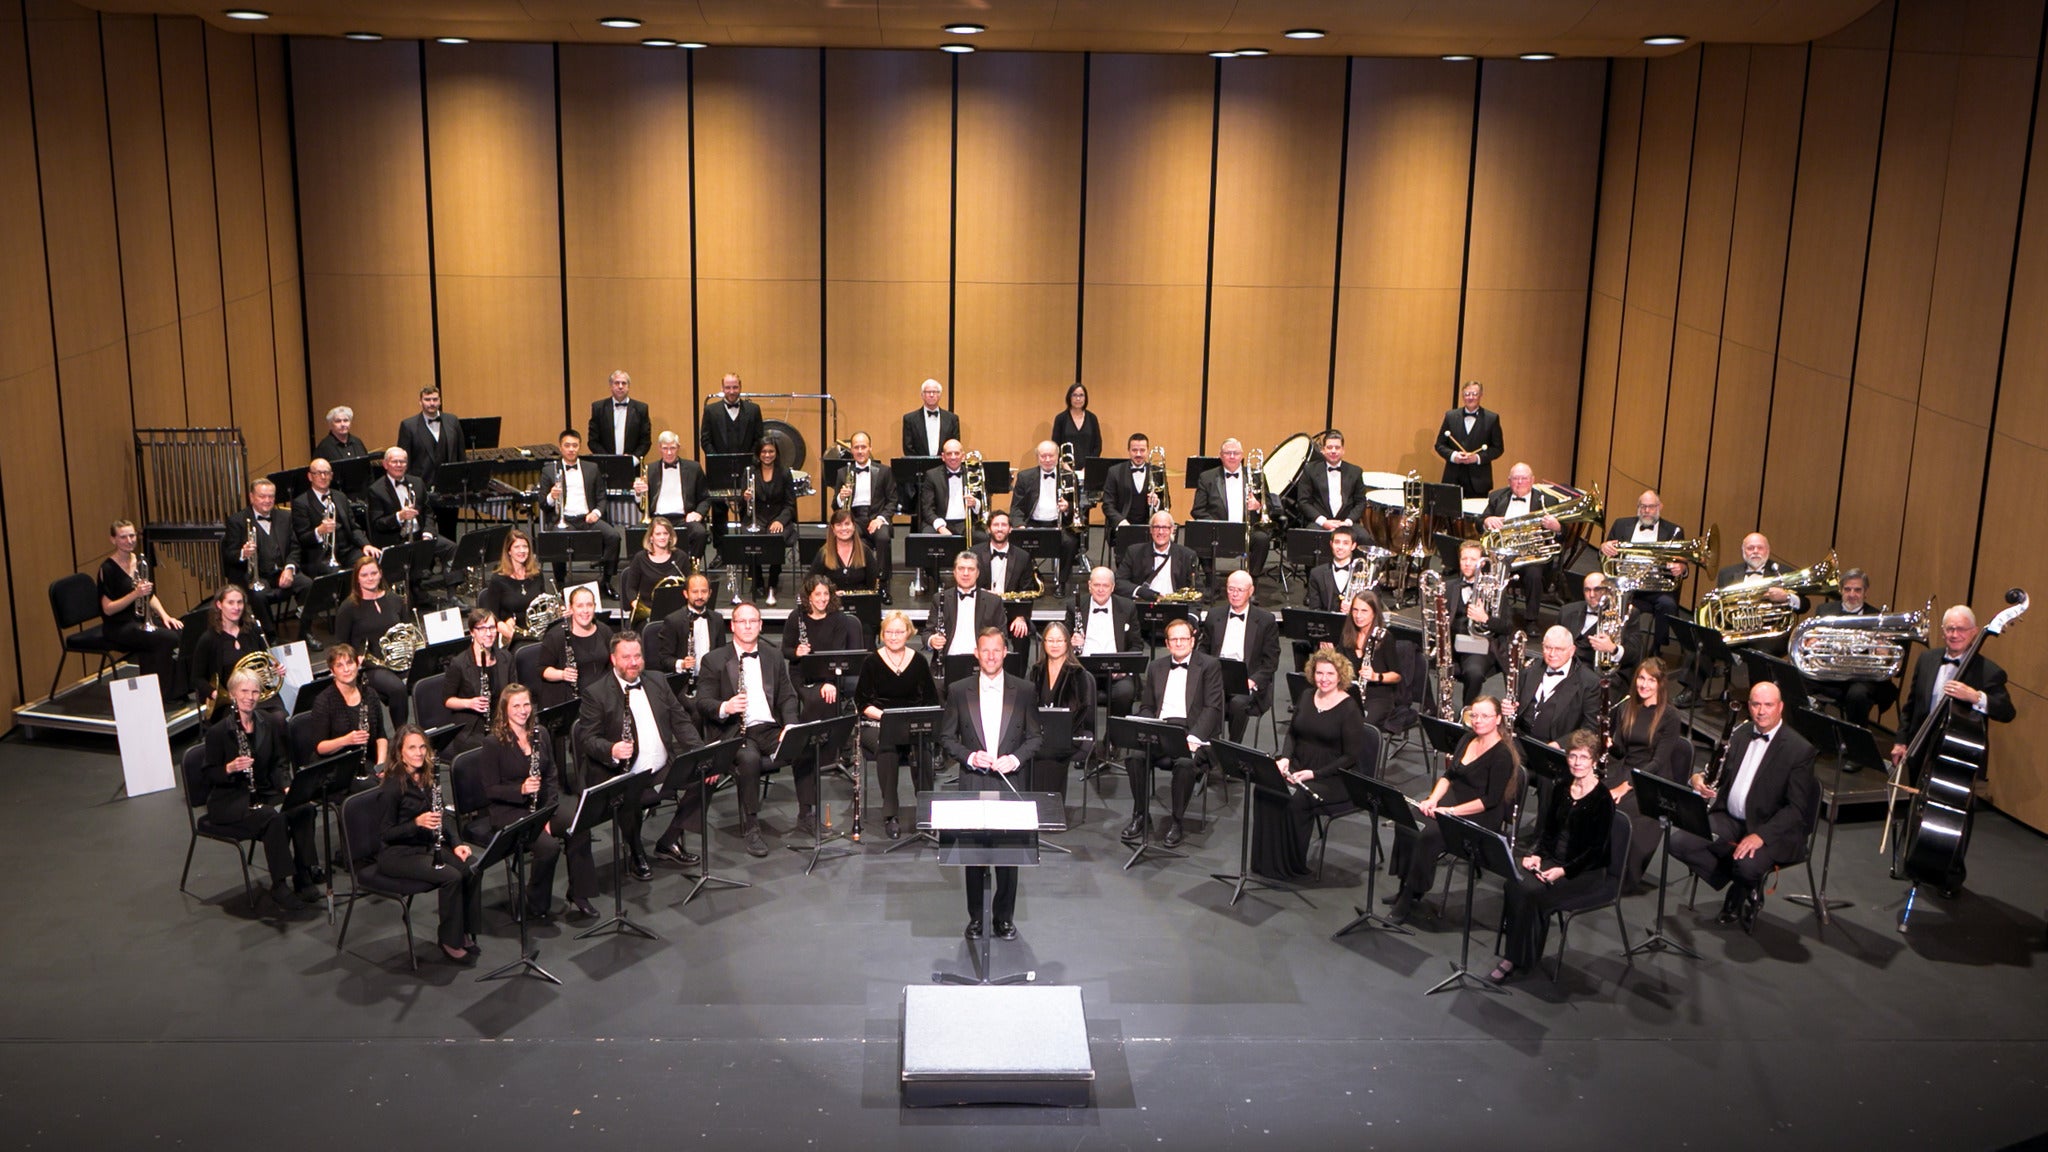 Tacoma Concert Band: Over The Rainbow at Pantages Theater